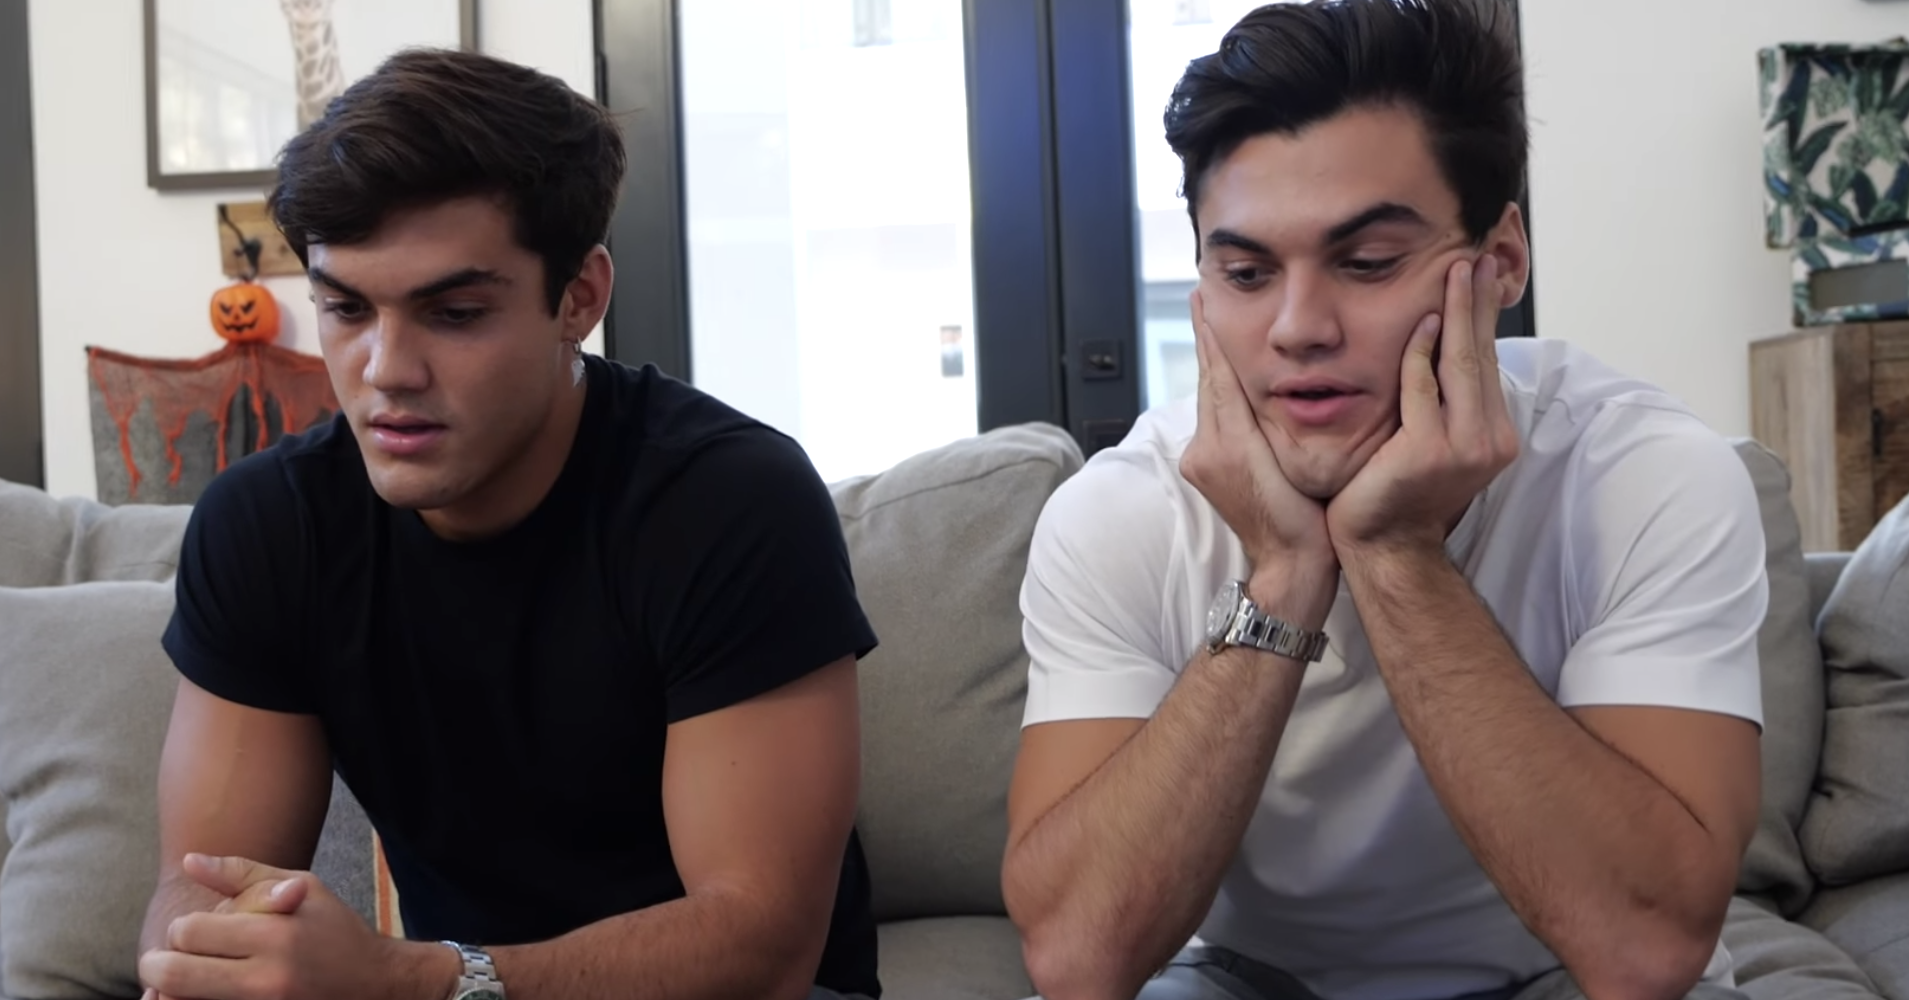 The Dolan Twins Announced They're No Longer Uploading Weekly YouTube Videos